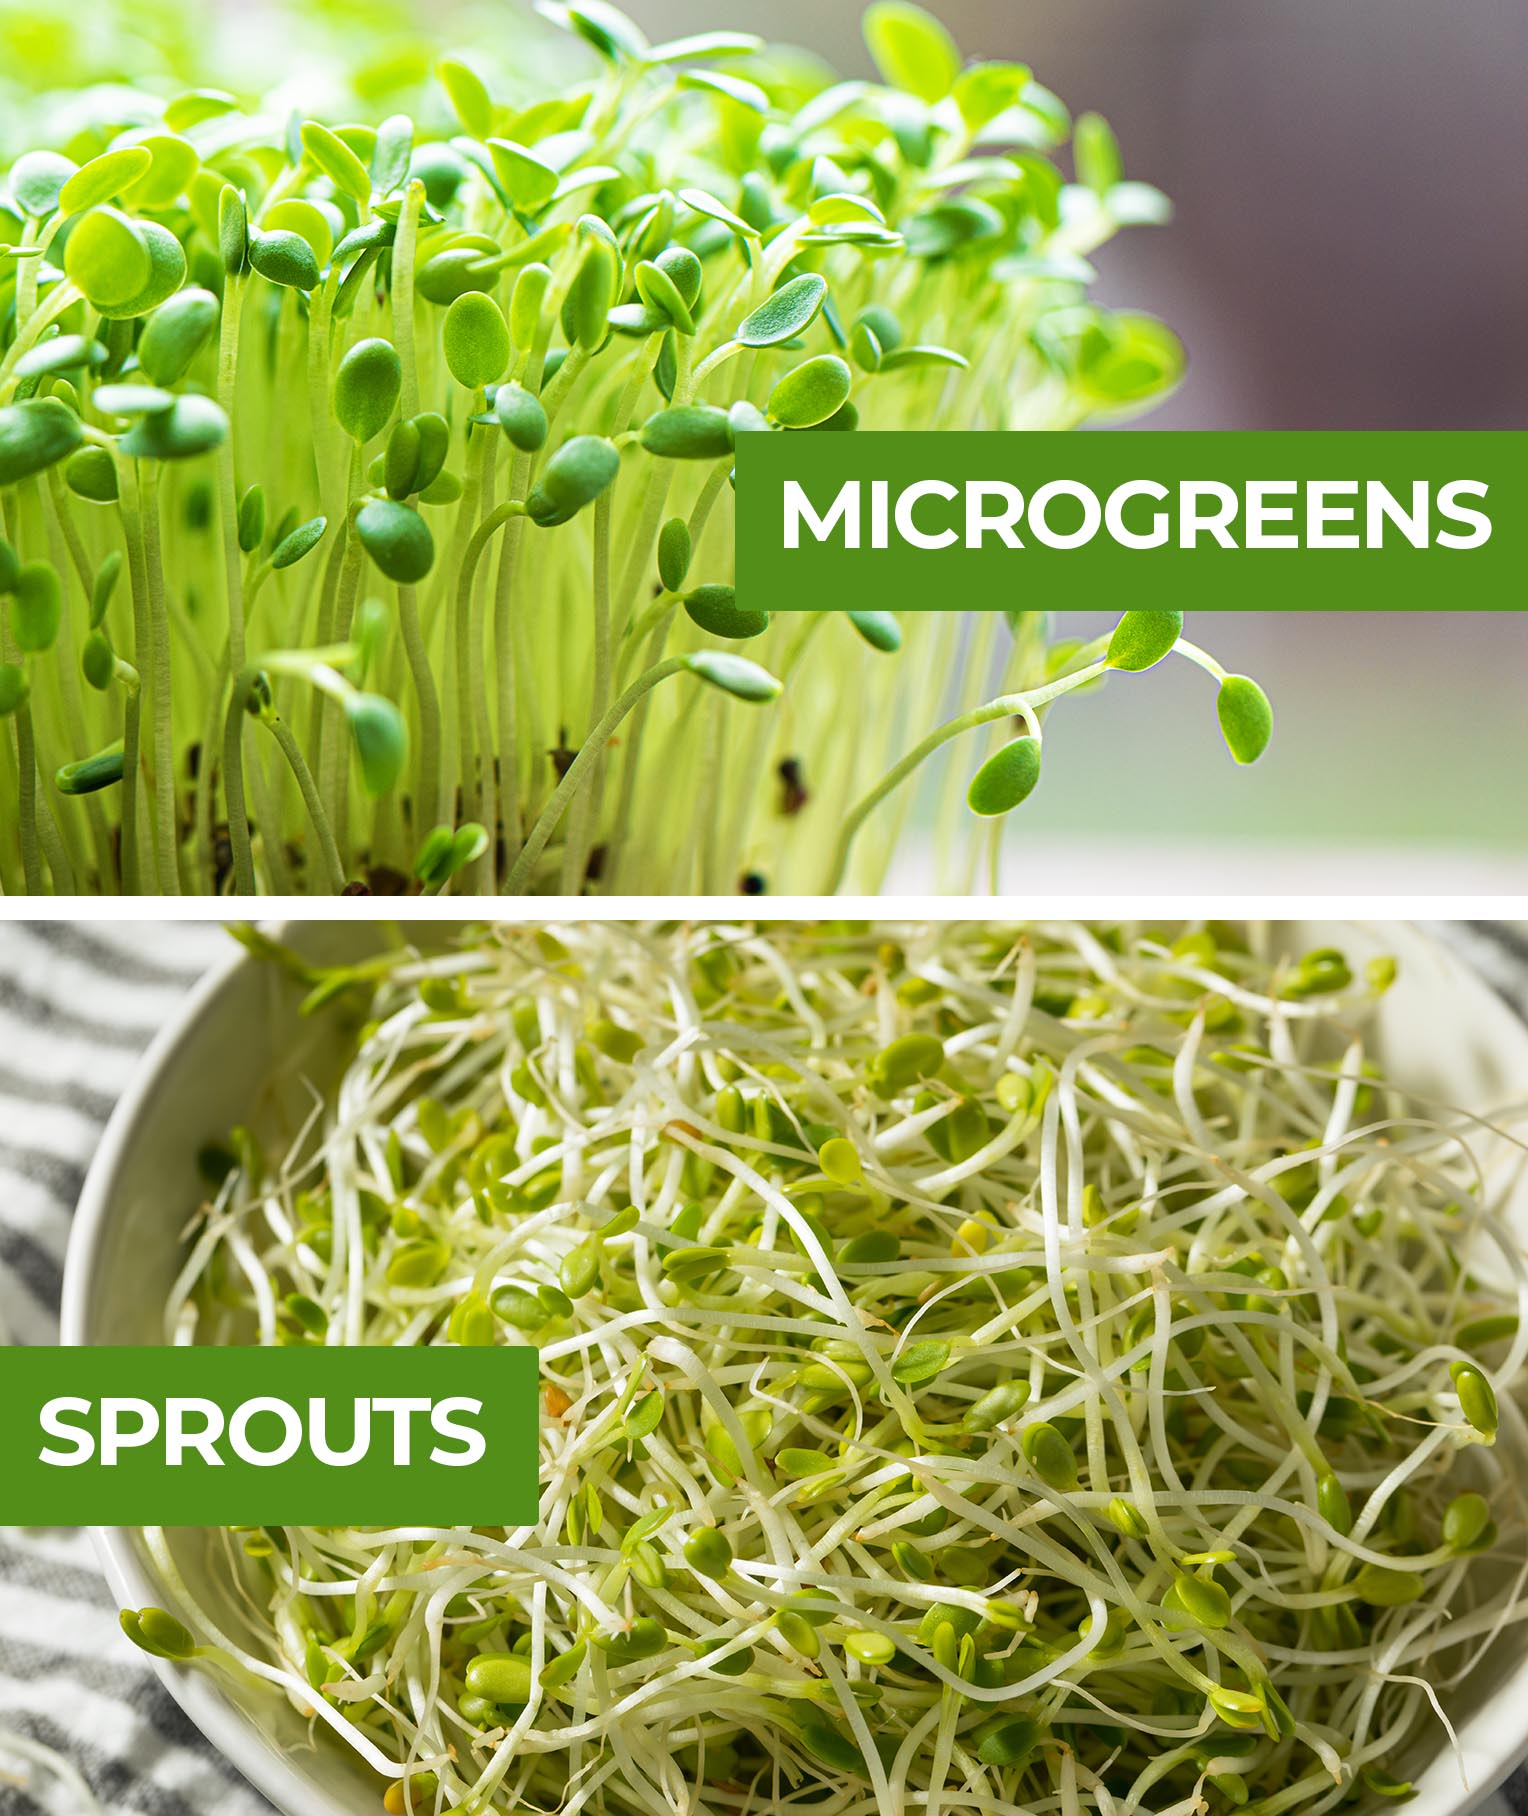 Microgreens vs Sprouts: What’s the Difference?